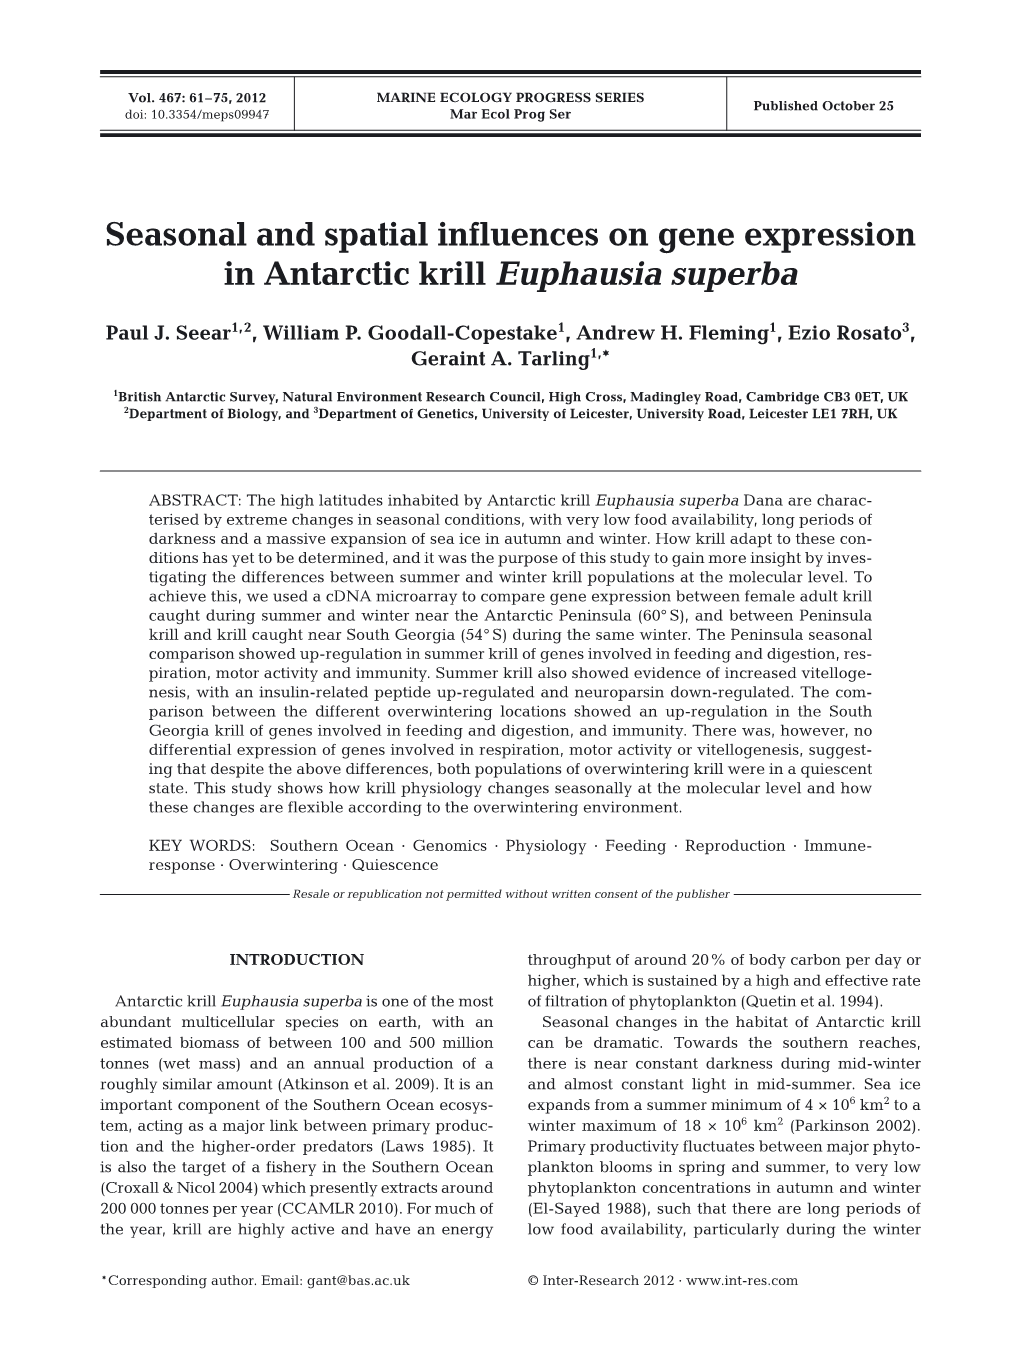 Seasonal and Spatial Influences on Gene Expression in Antarctic Krill Euphausia Superba